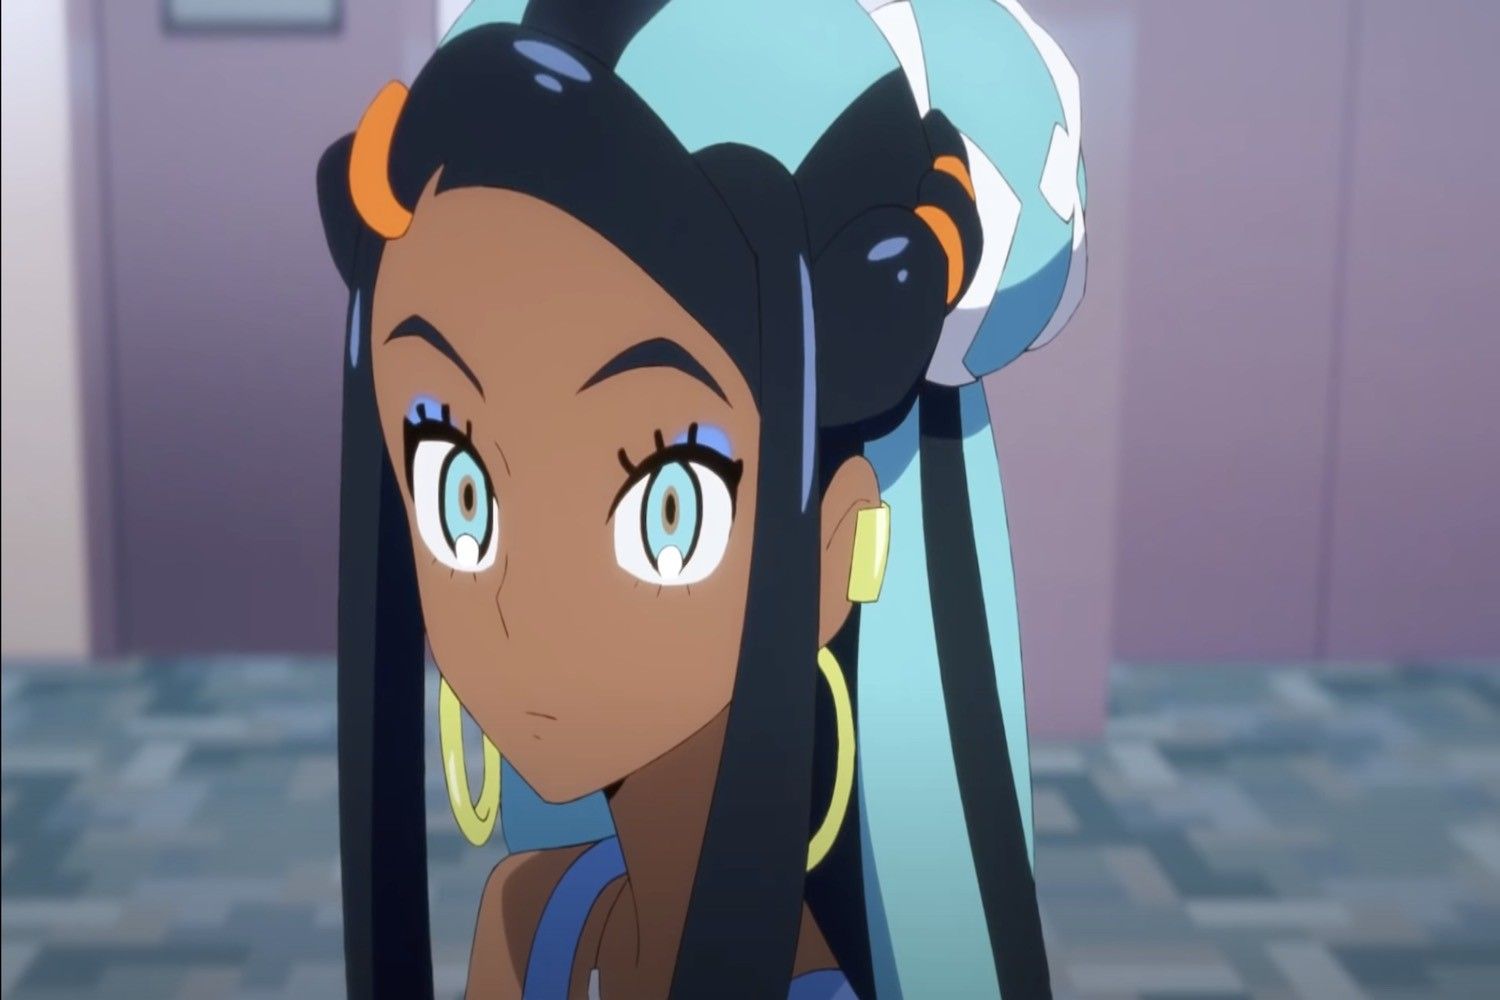 16 Of The BEST Black Female Anime Characters You Should Know